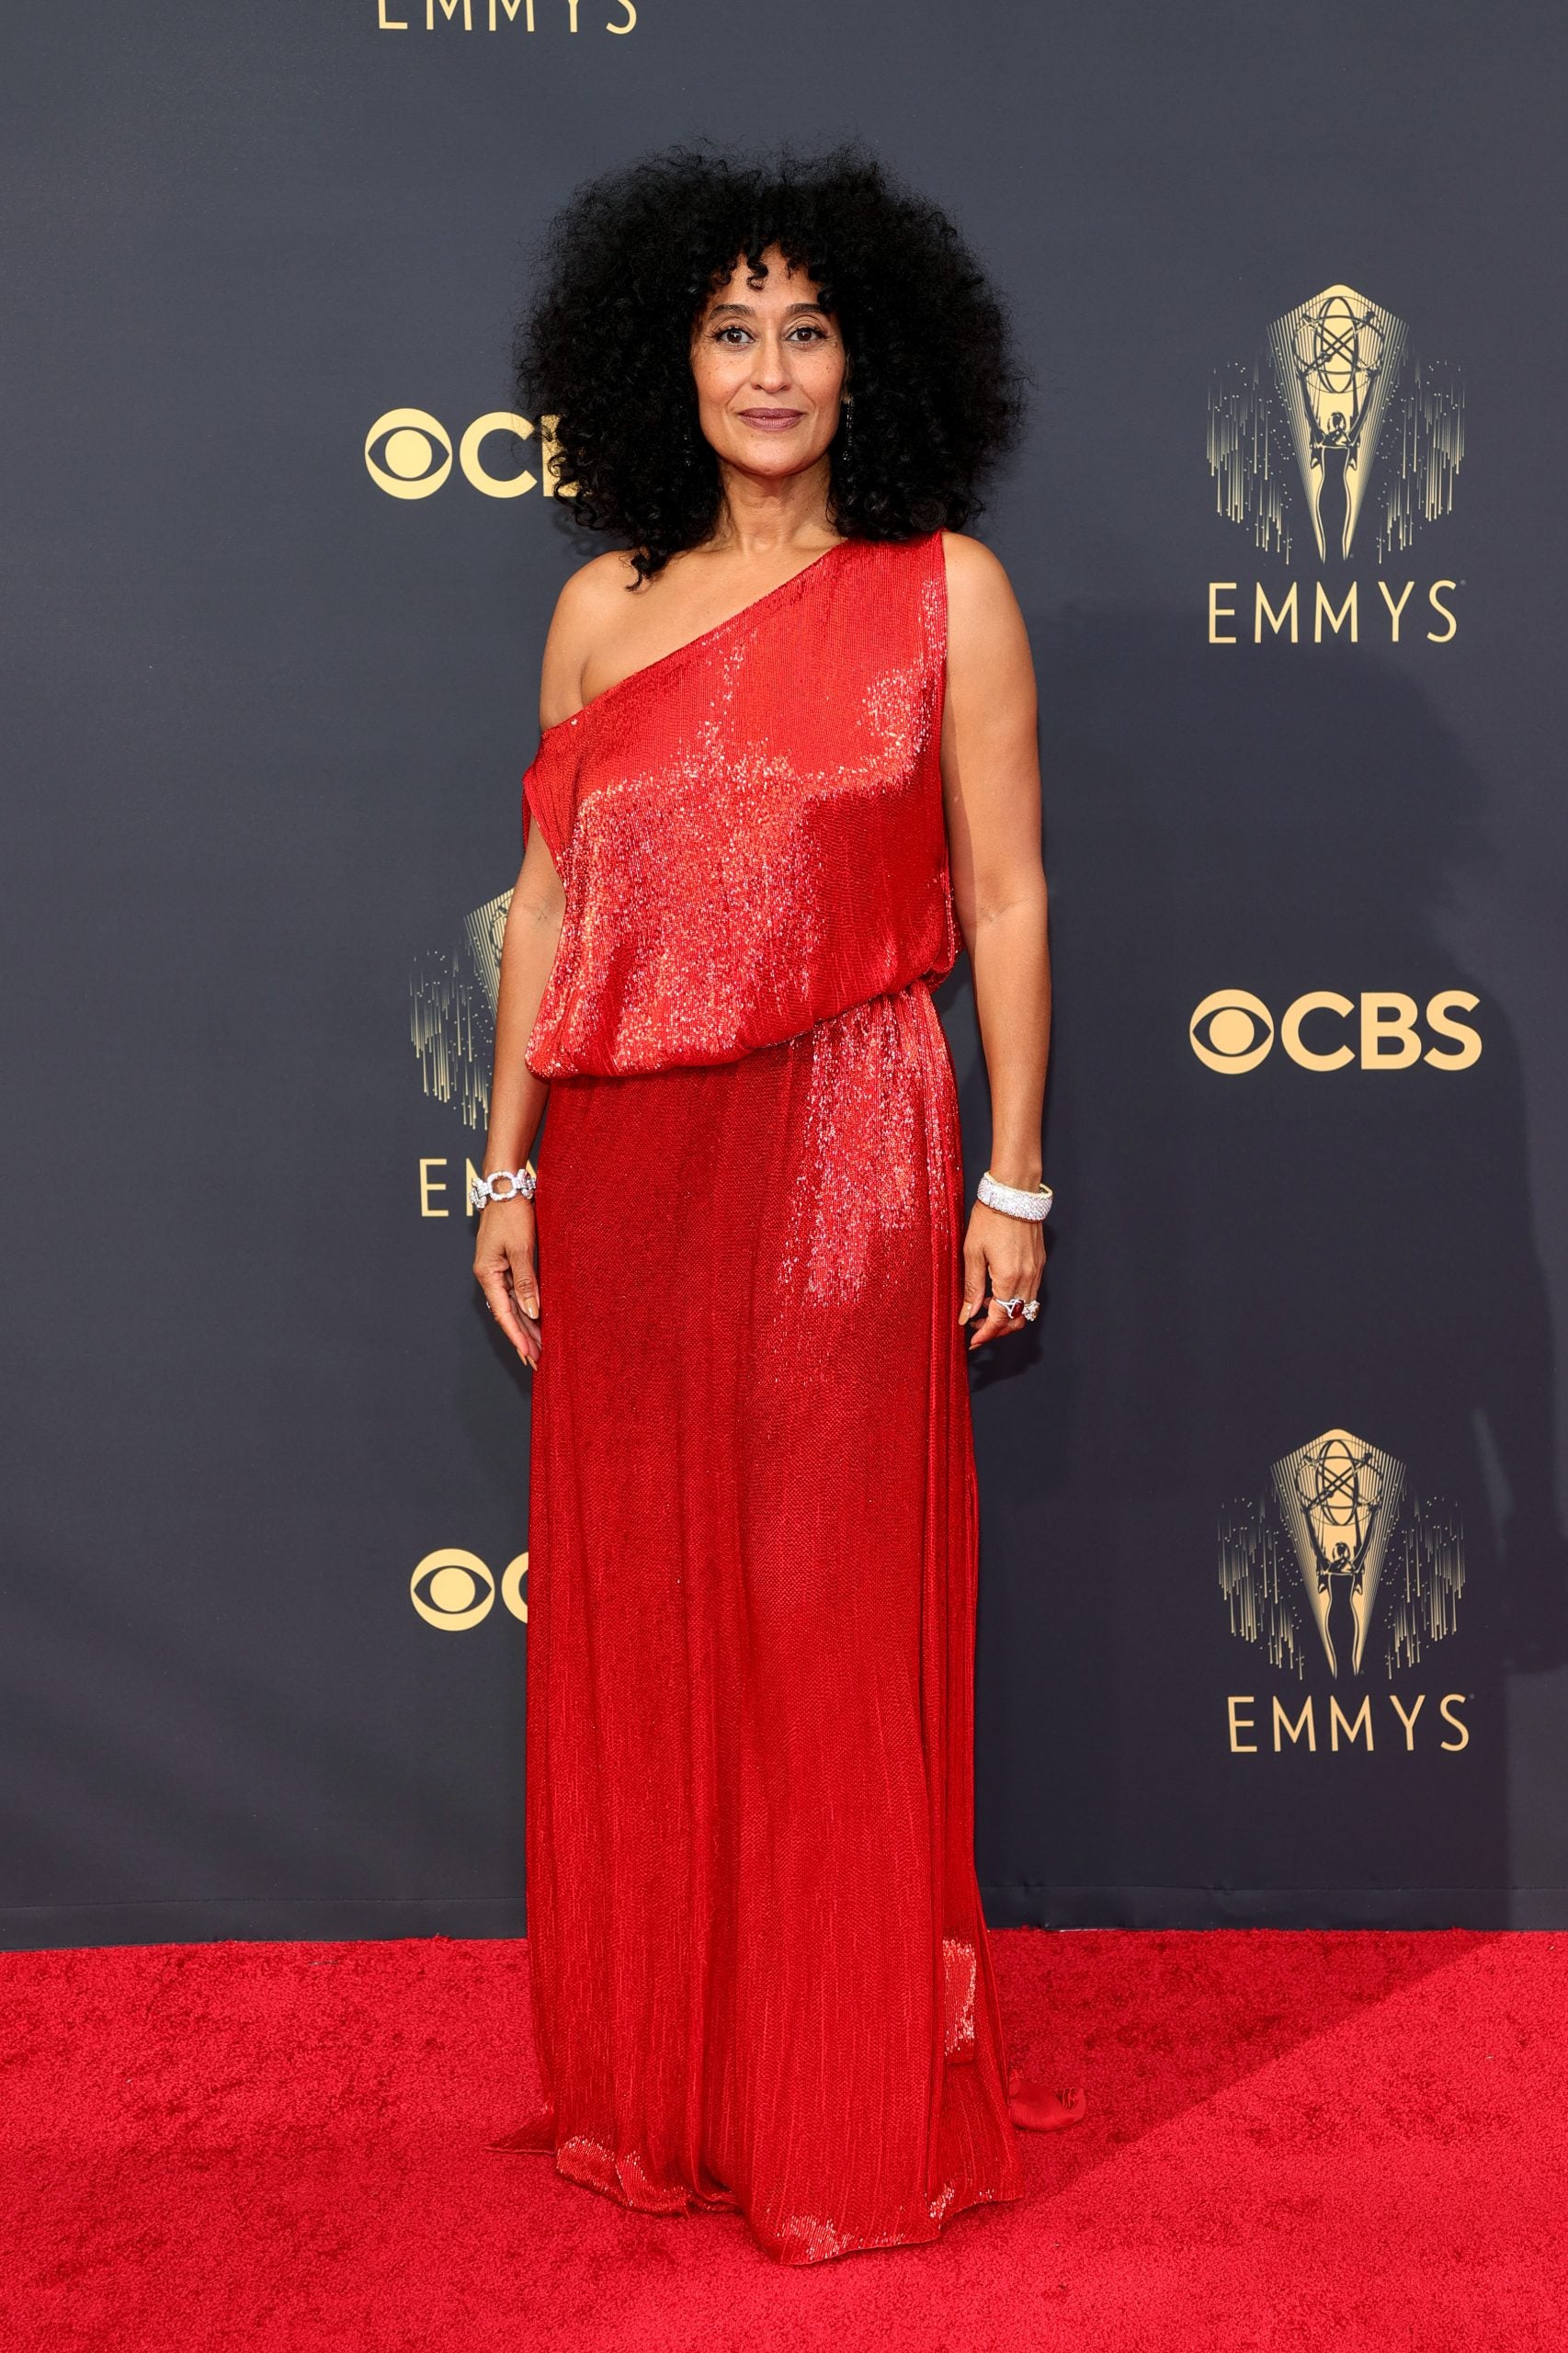 The Surprising Fashion Switch-Up At This Year's Emmy Awards